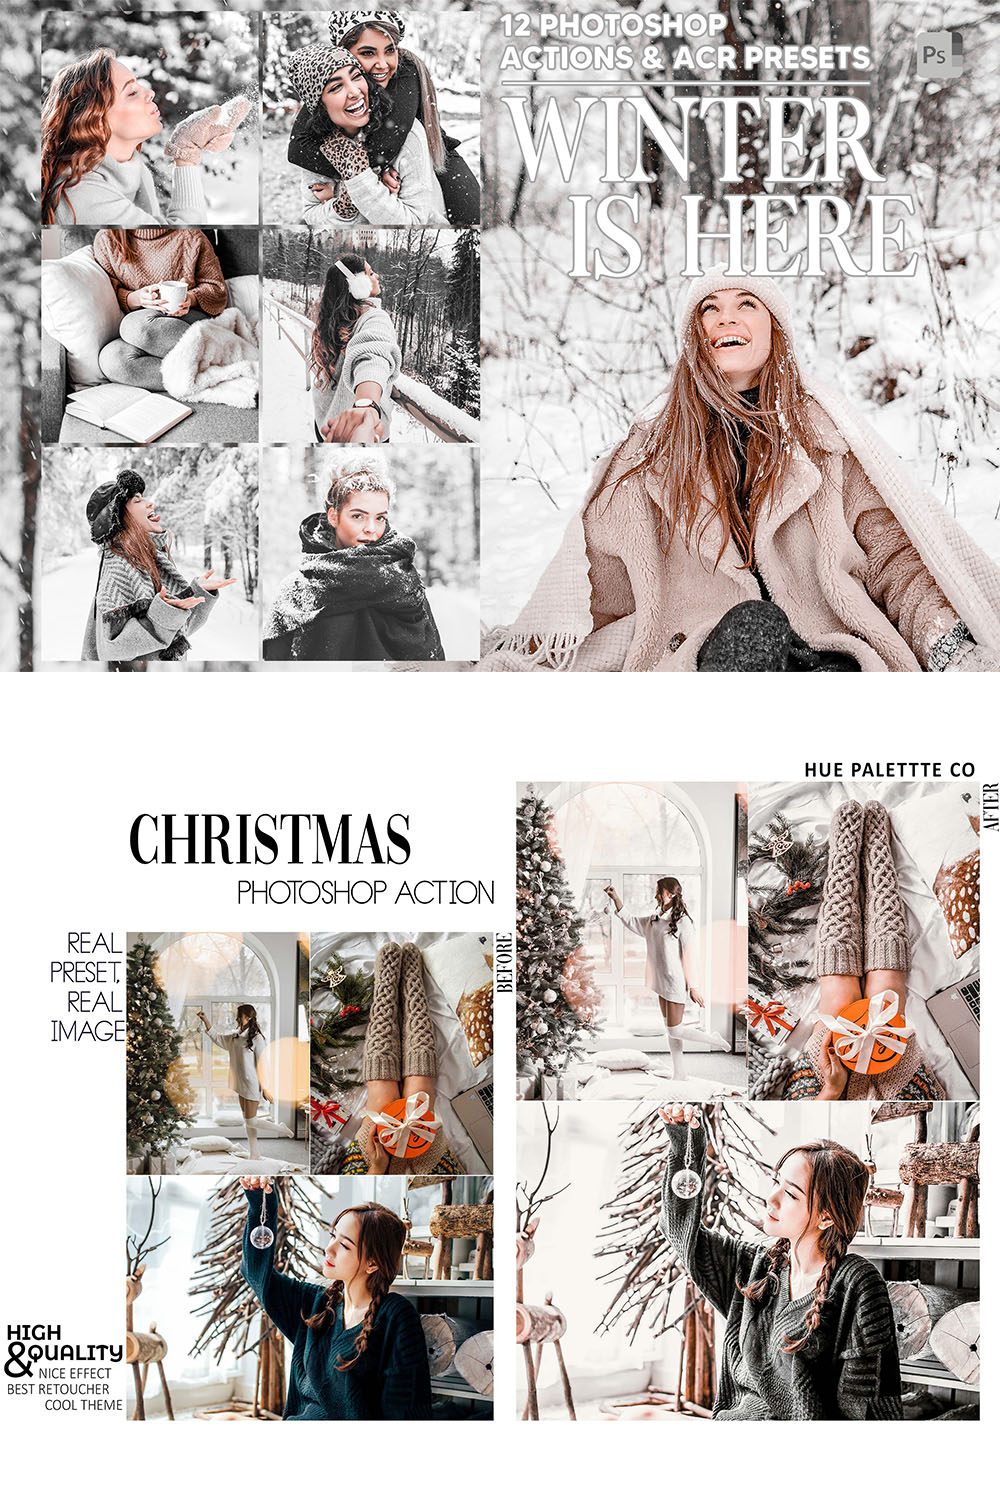 12 Photoshop Actions, Winter Is Here Ps Action, Clean ACR Preset, Christmas Ps Filter, Atn Portrait And Lifestyle Theme For Instagram, Blogger pinterest preview image.